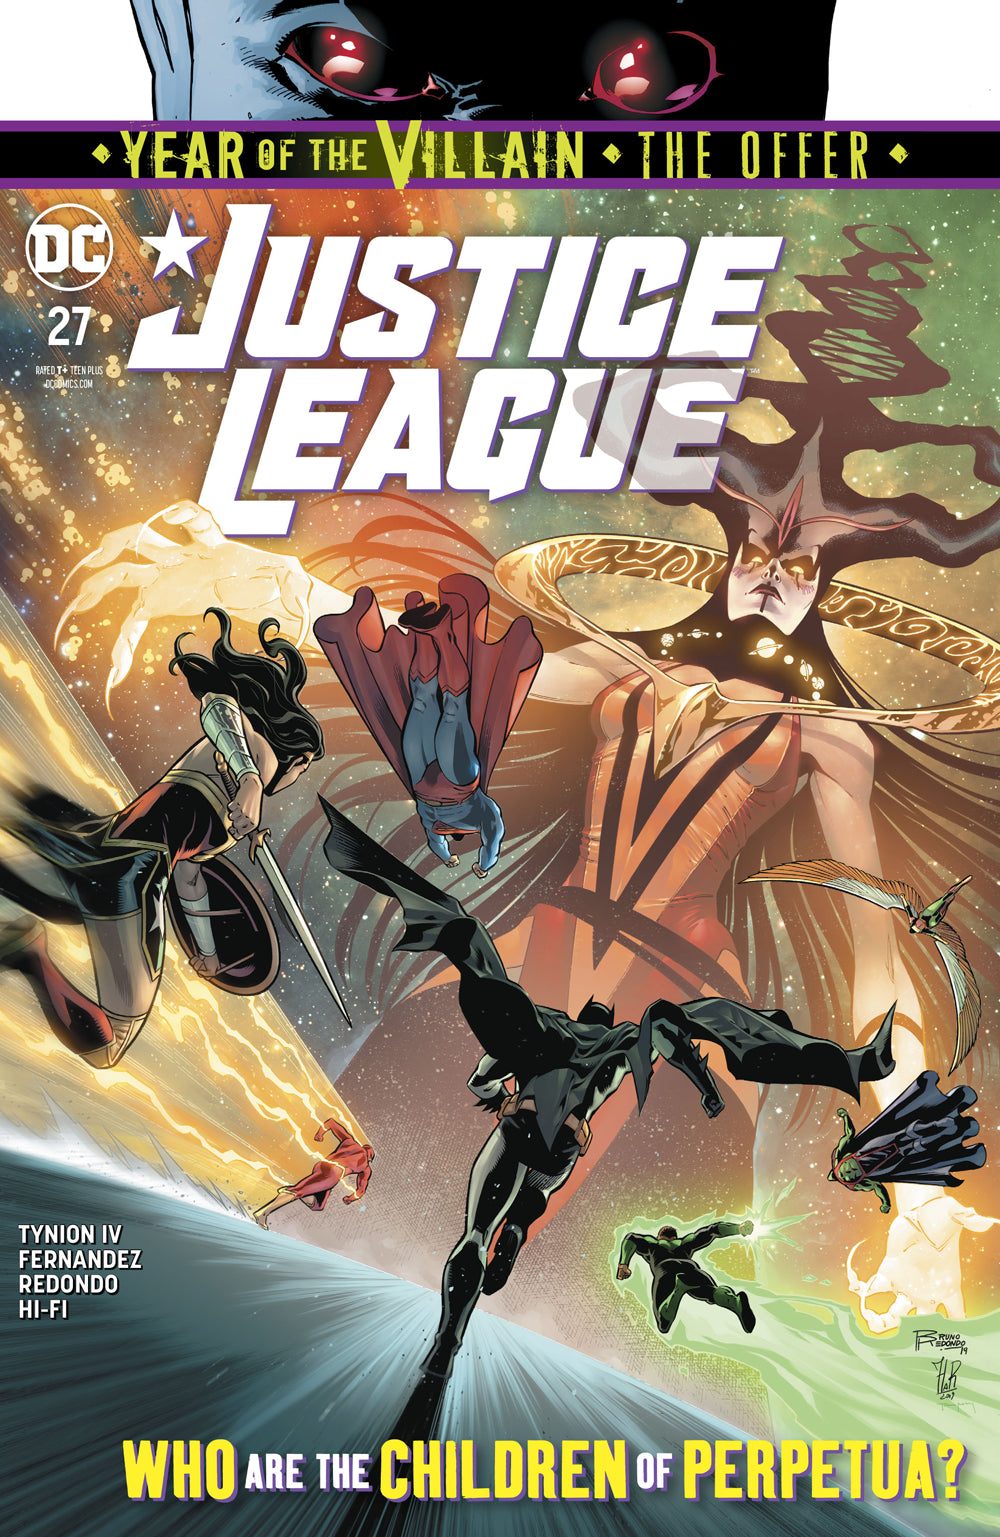 JUSTICE LEAGUE #27 YOTV VAR ED THE OFFER | Game Master's Emporium (The New GME)